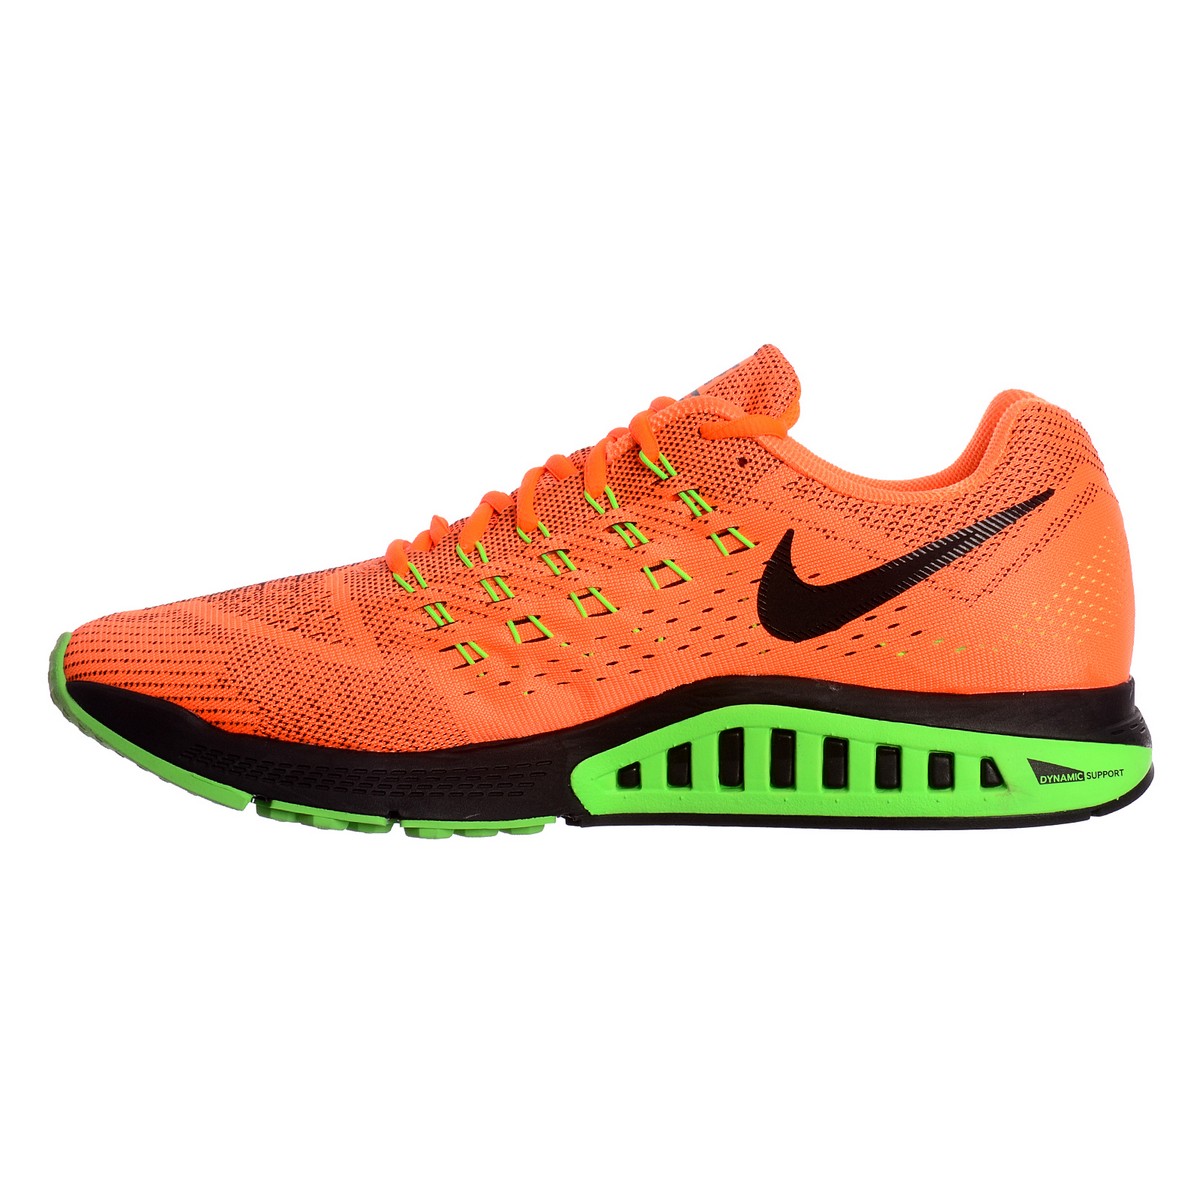 Nike NIKE AIR ZOOM STRUCTURE 18 